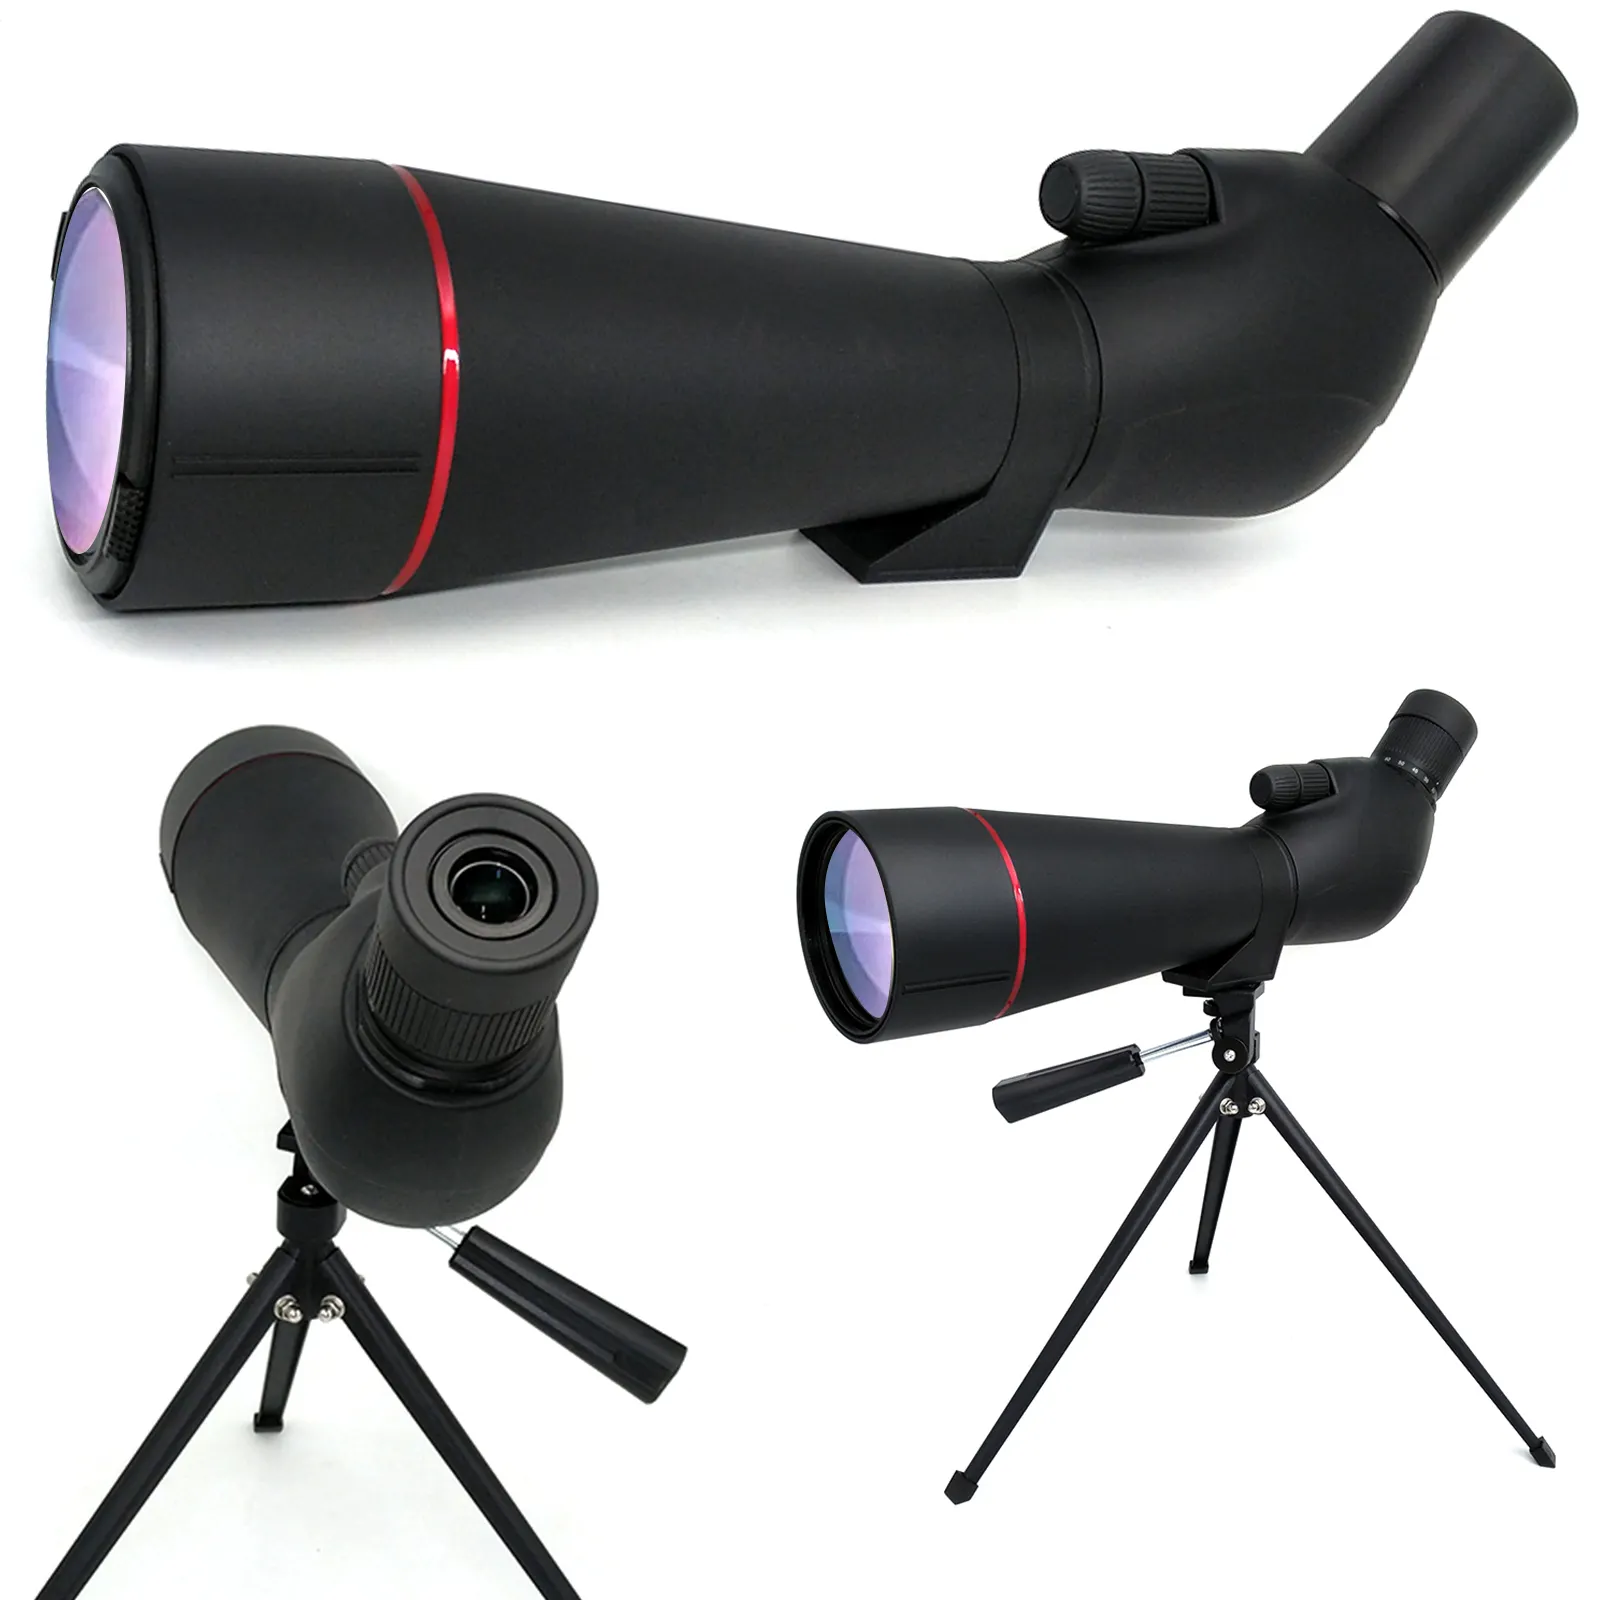 High End 20-60X80 Spotting Scope for Target Shooting Dual Focusing Bird Watching Spotting Scope with 24mm Large Eyepiece